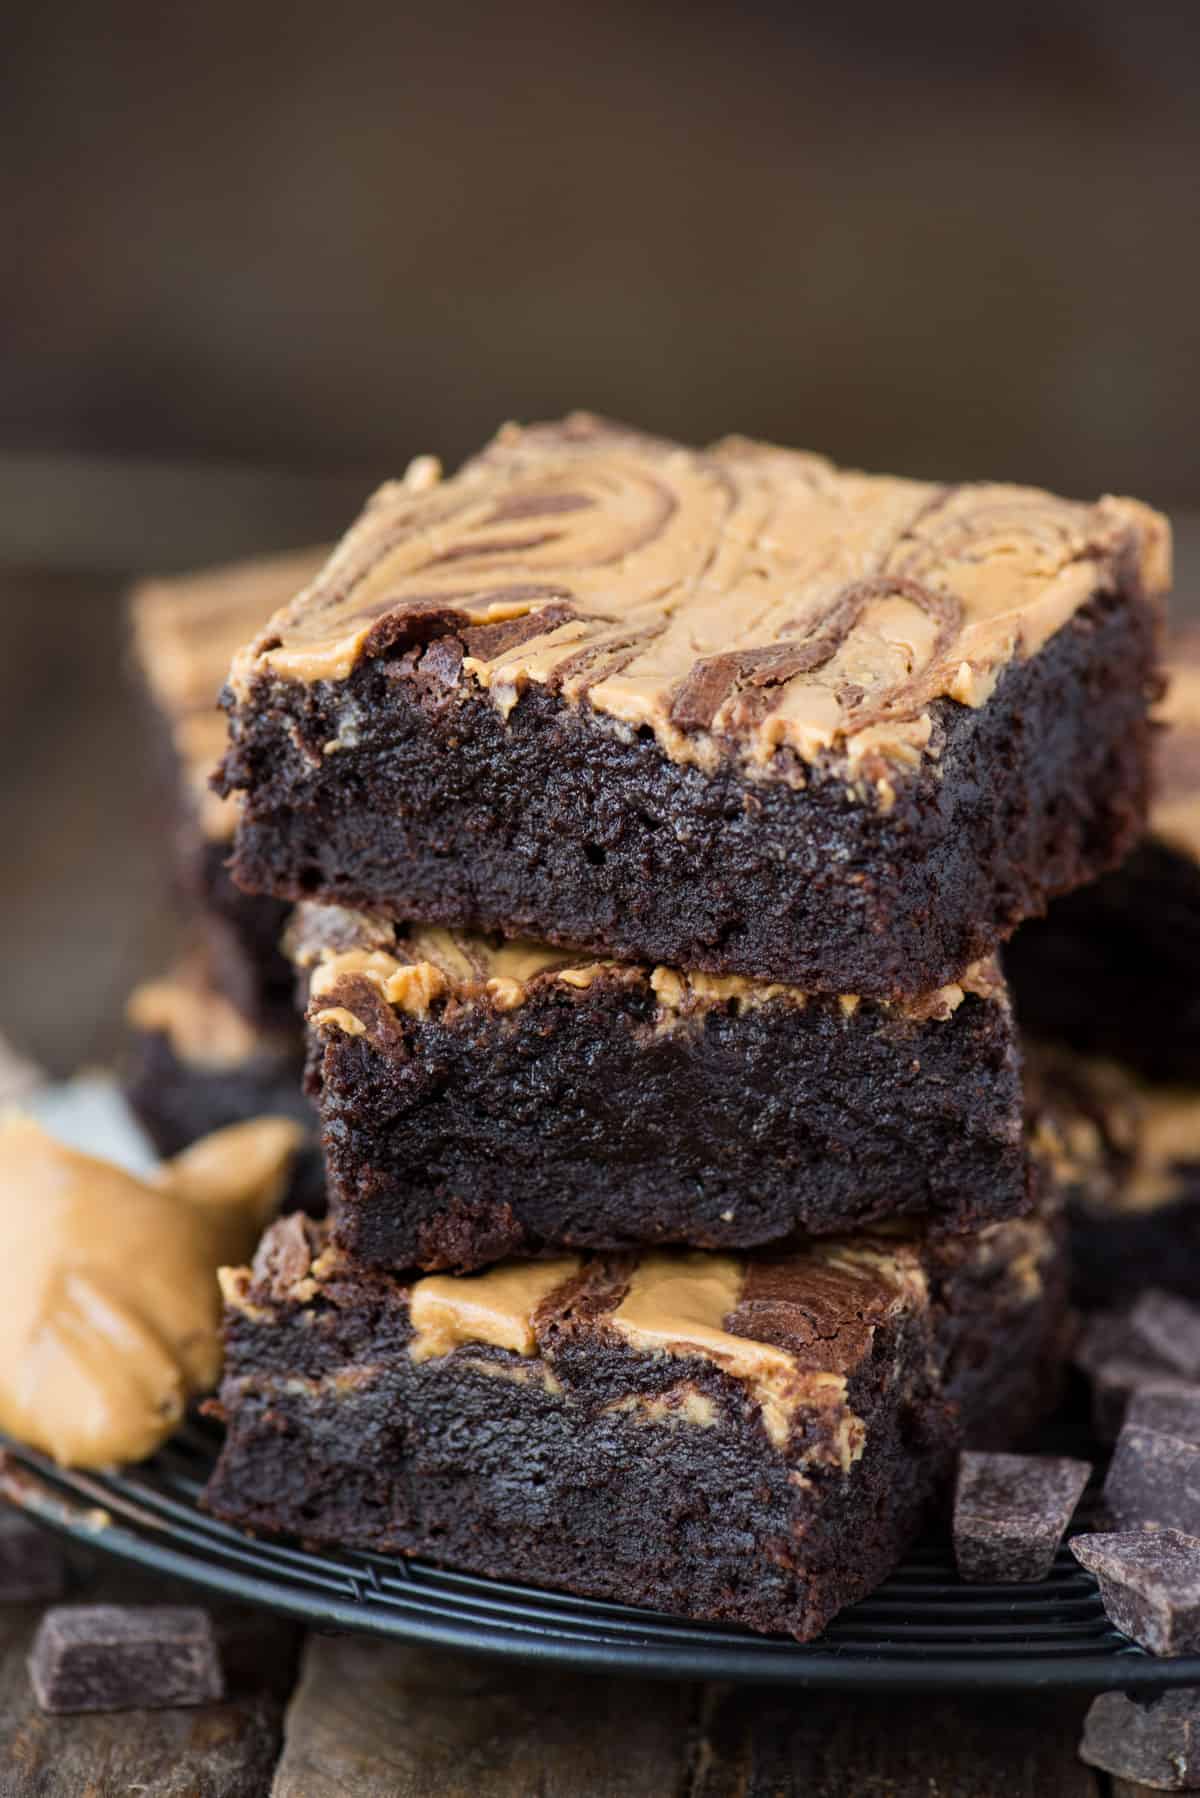 3 peanut butter swirl brownies stacked on each other on dark background